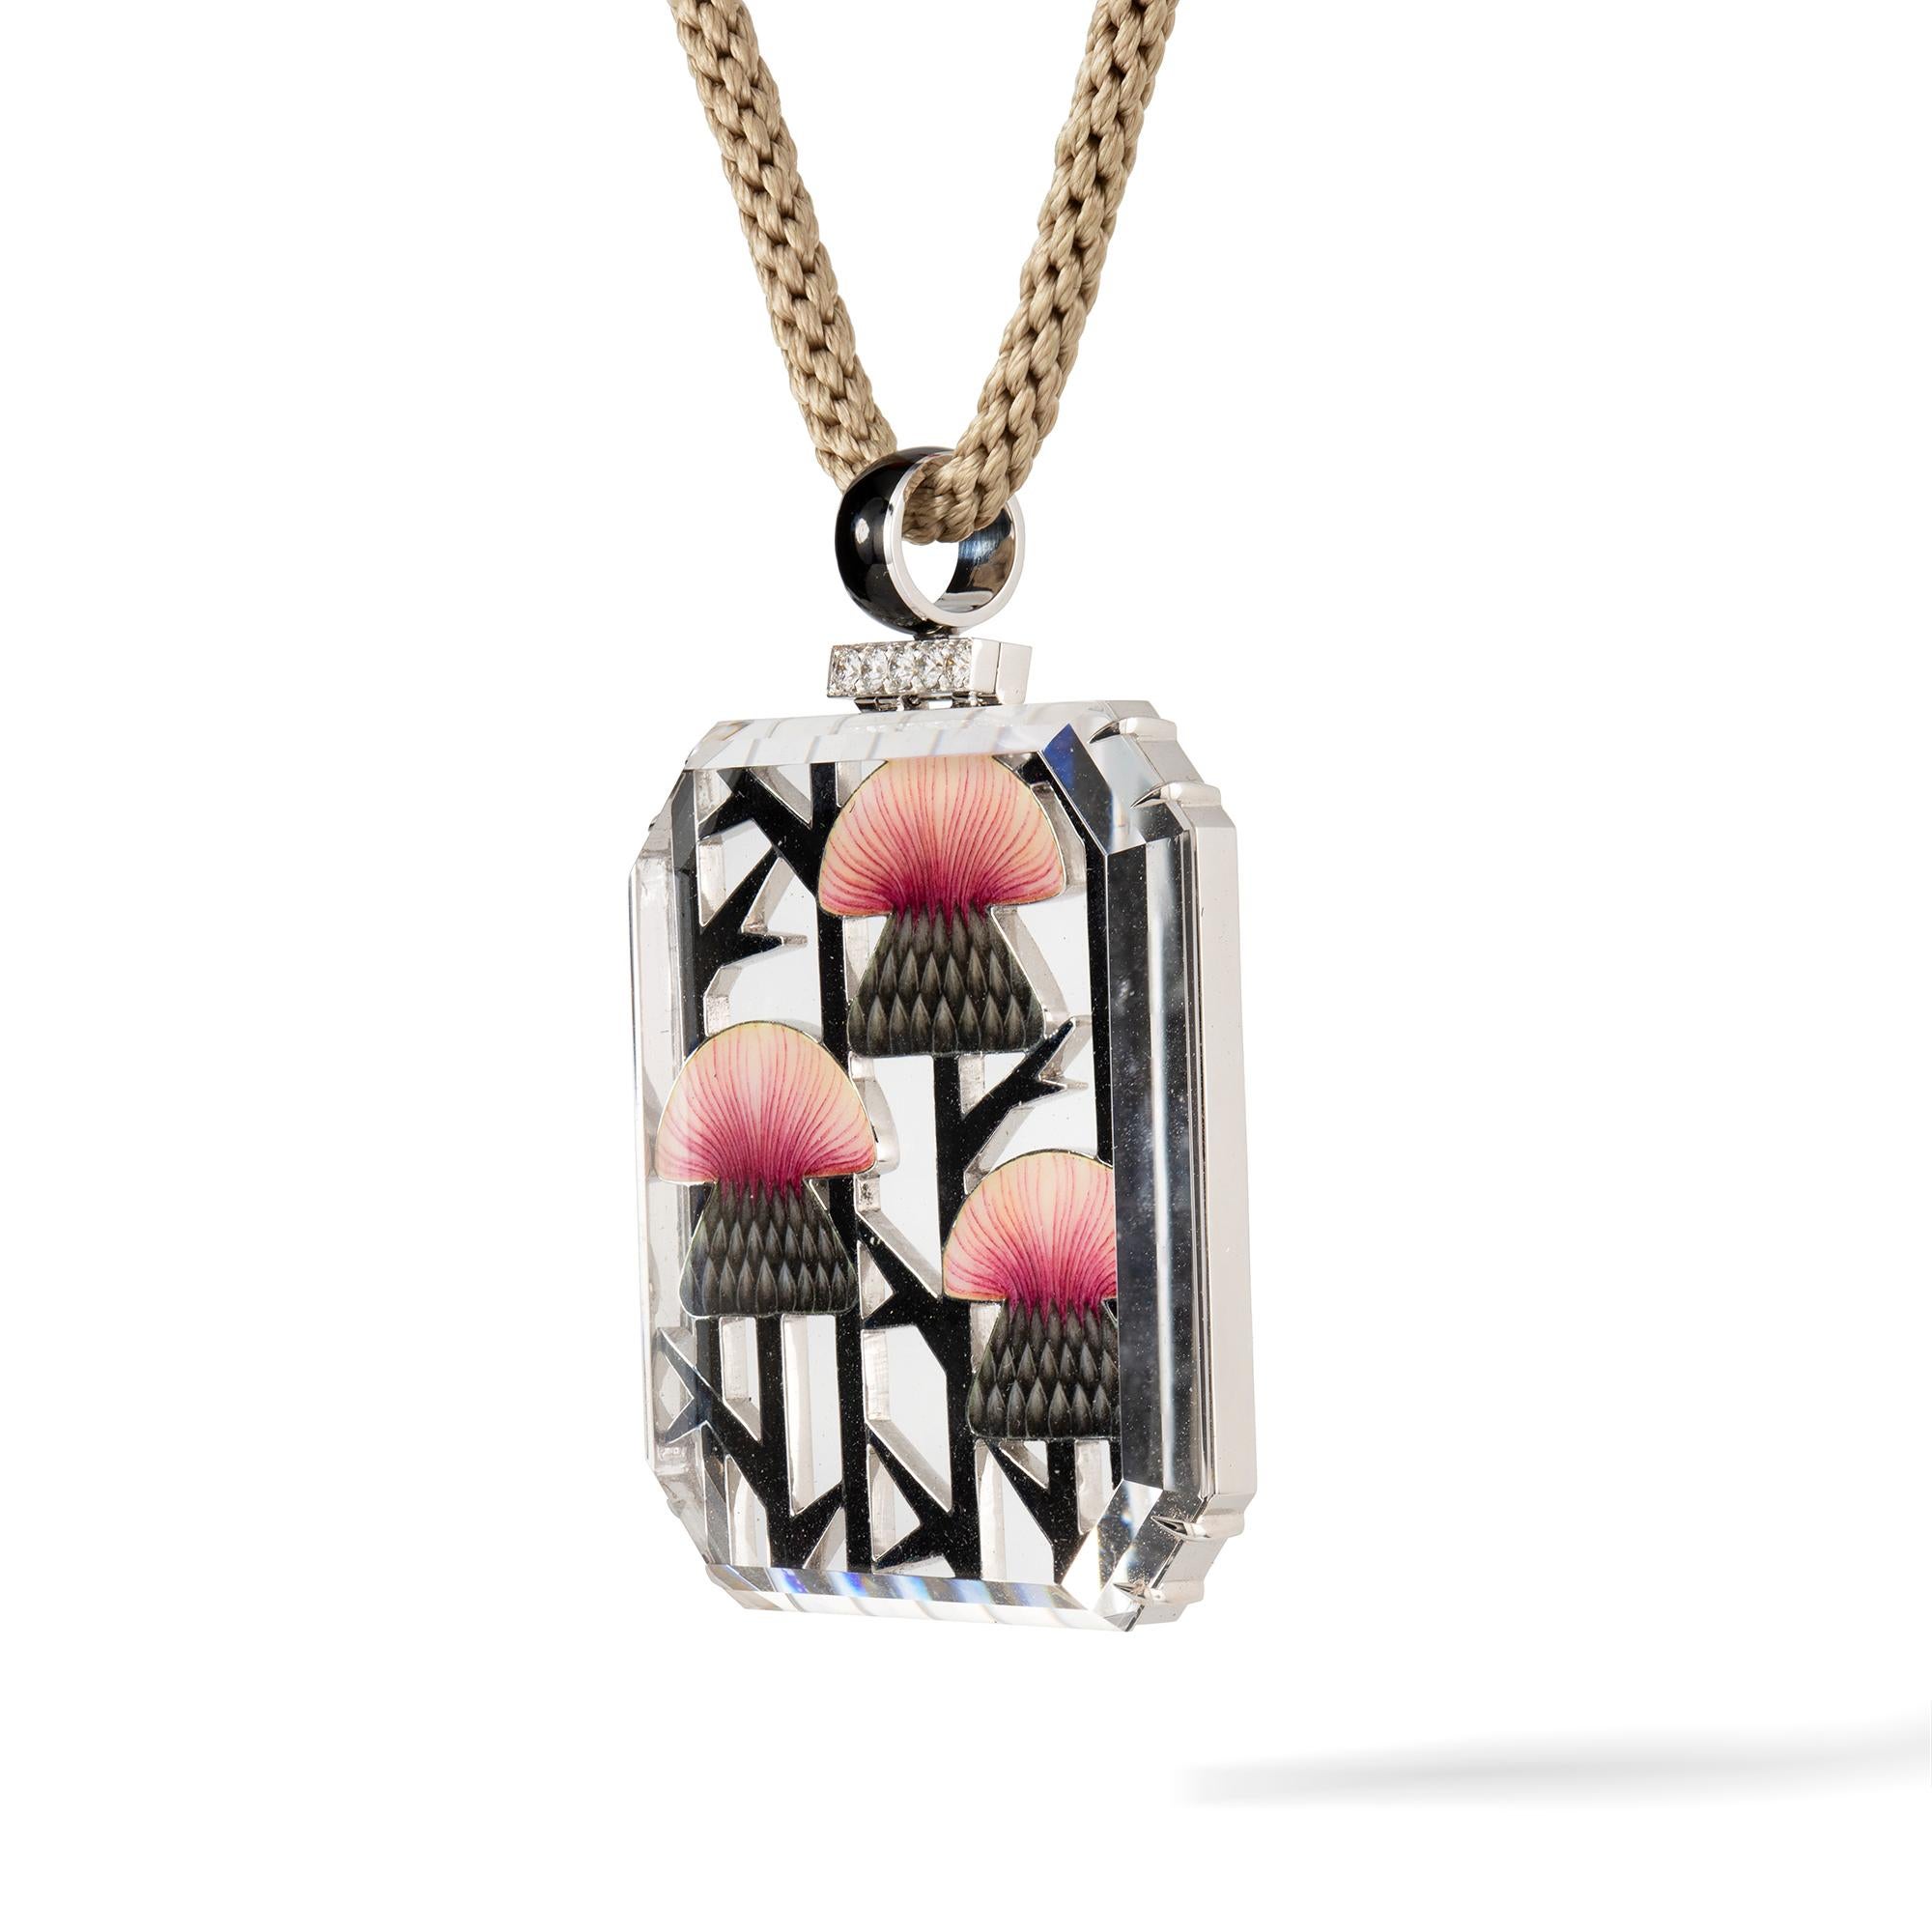 A Burdock pendant by Ilgiz F, the octagonal shape faceted plaque with an openwork enamelled back depicting burdocks, suspended by a diamond-set and black enamelled loop, with woven-silk cord with diamond-set slider and black enamelled finials, made